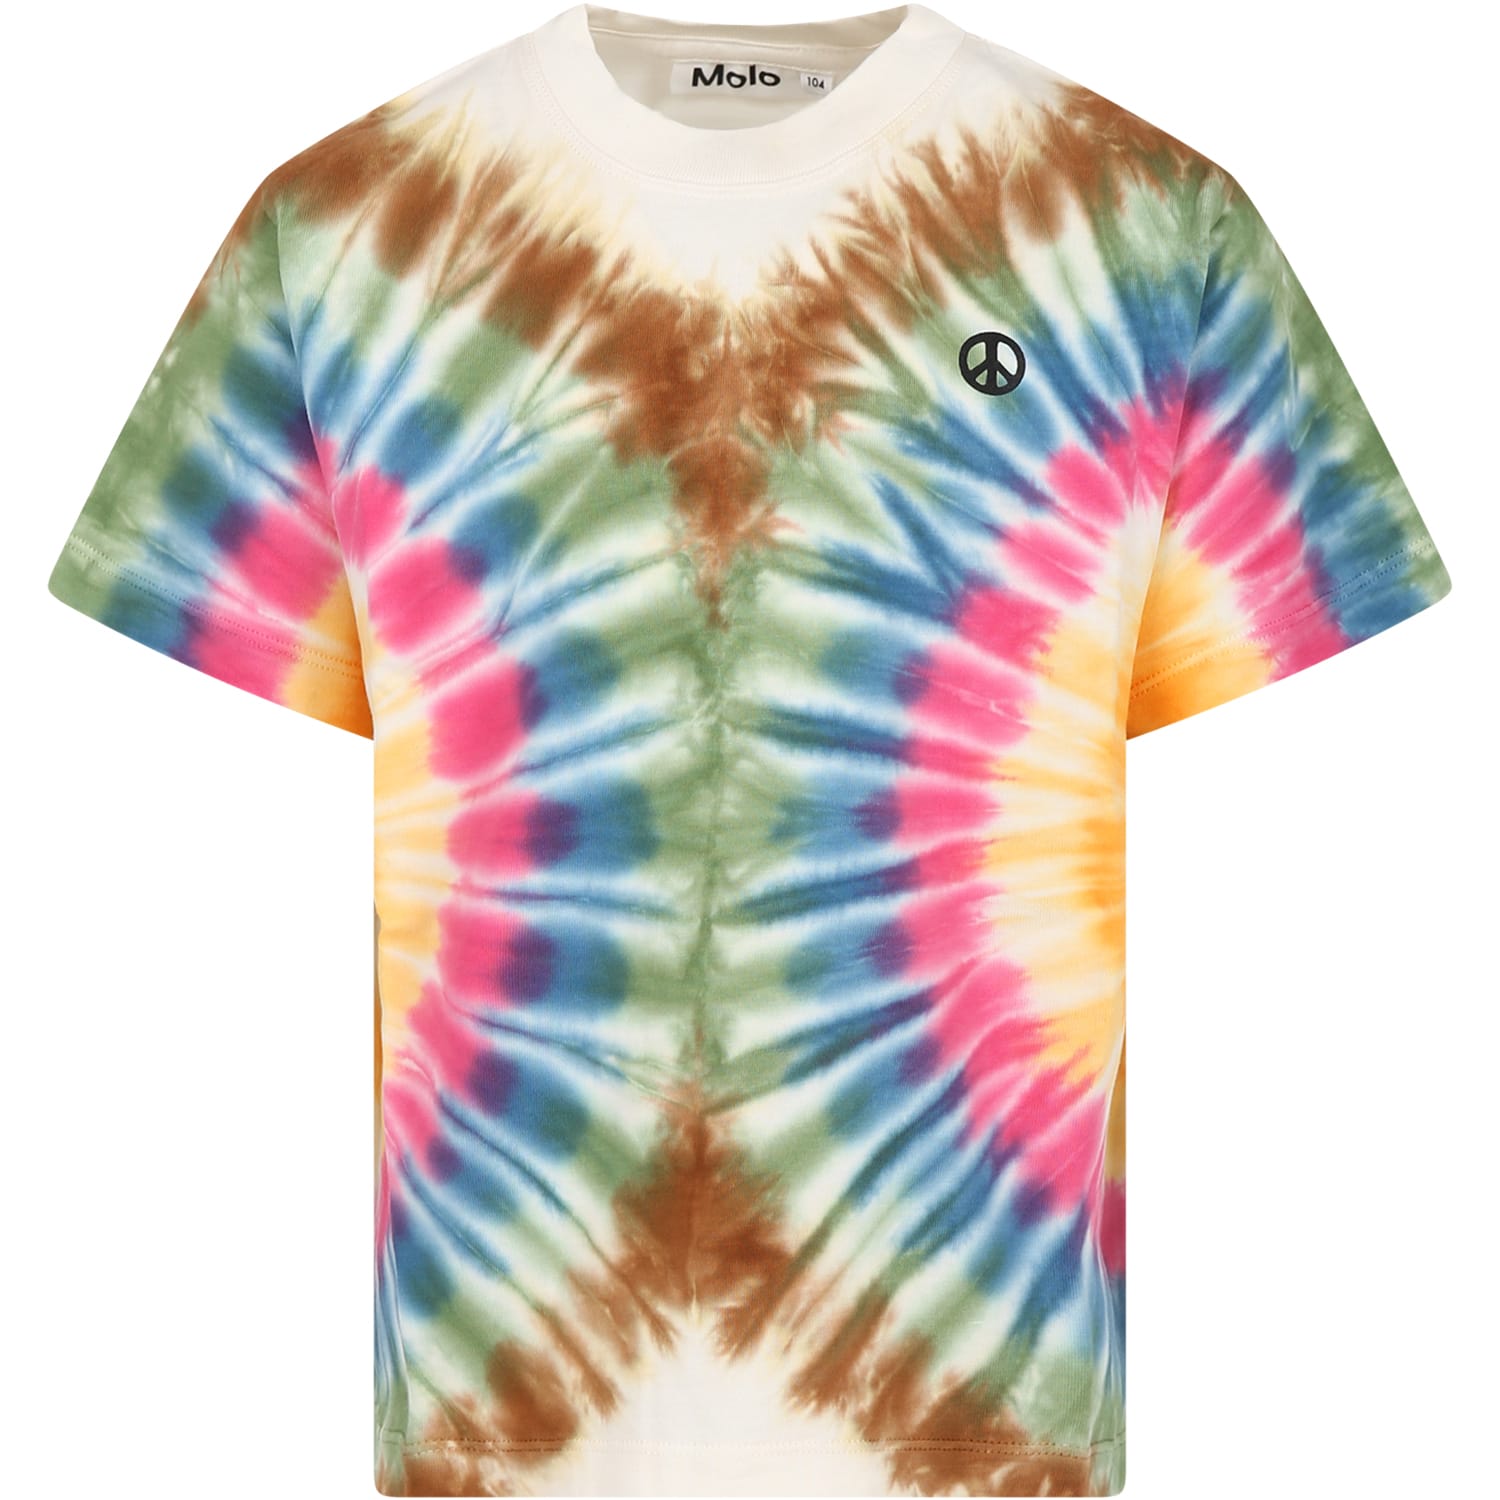 Molo Ivory T-sjhirt For Kids With Tie-dye Print In Multicolor